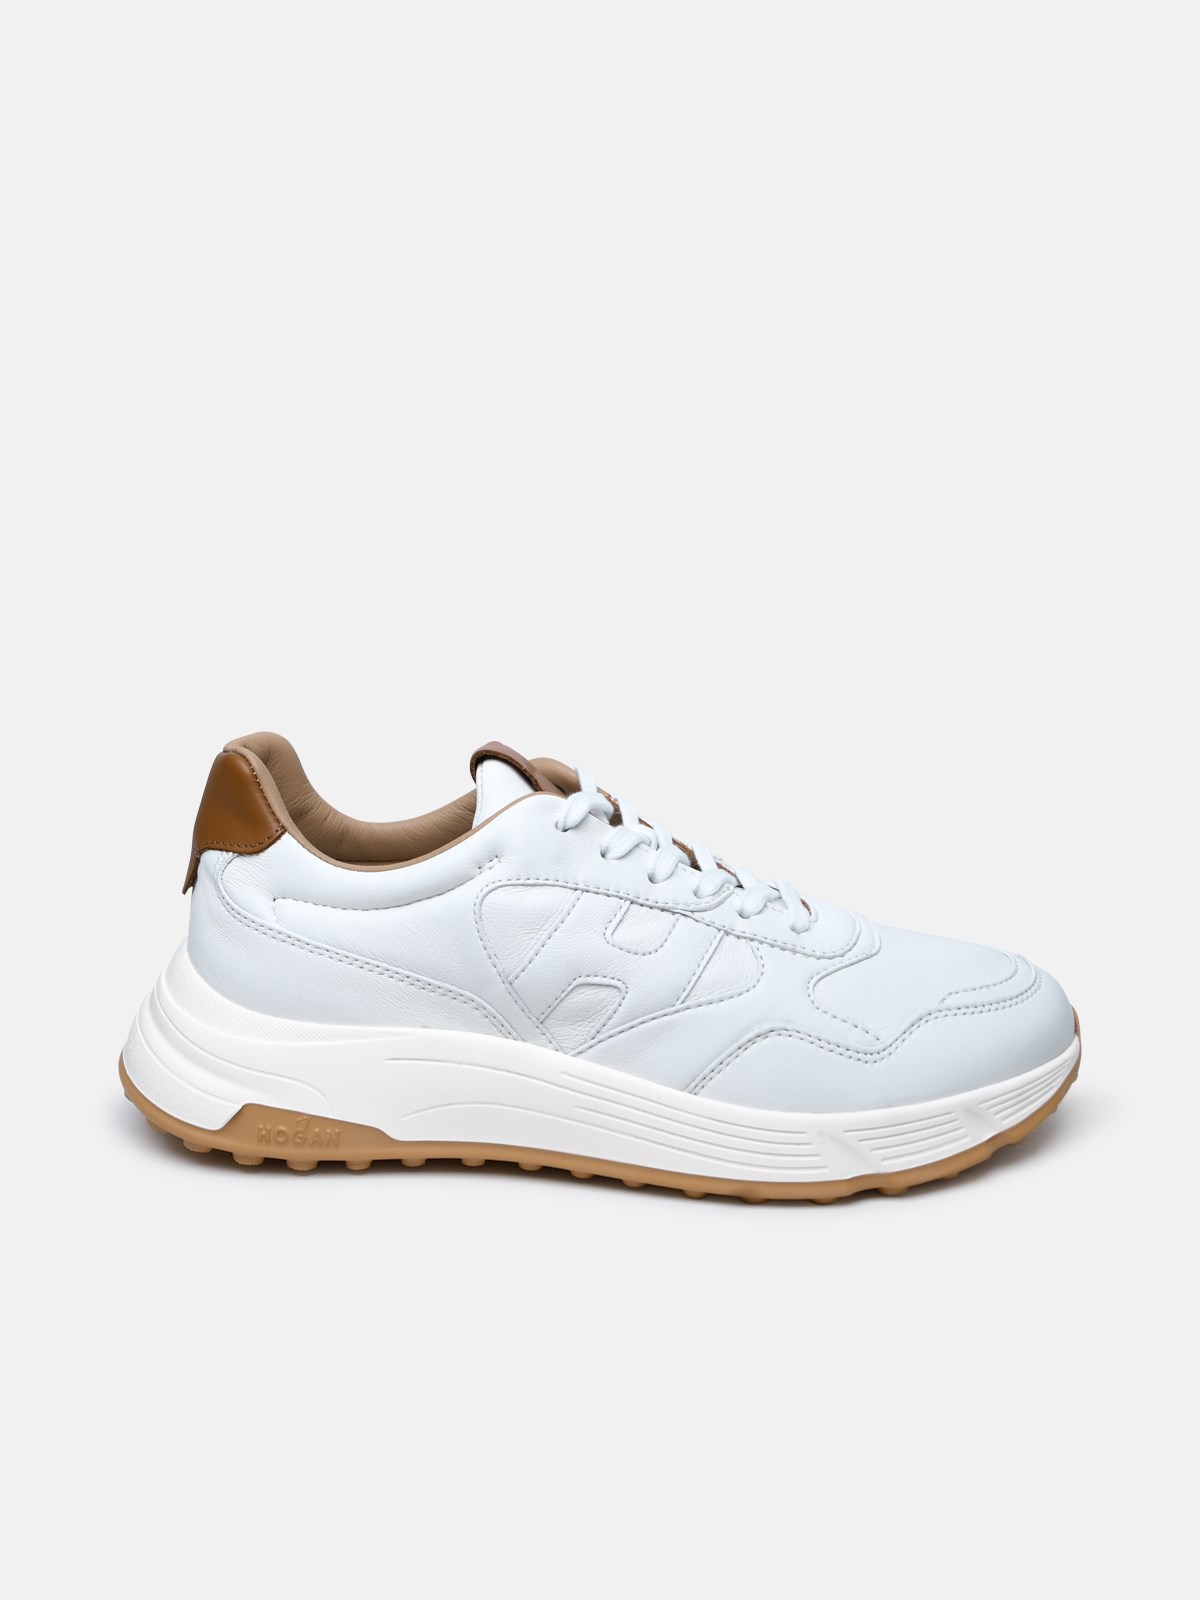 Hogan White Leather Sneakers In Ivory